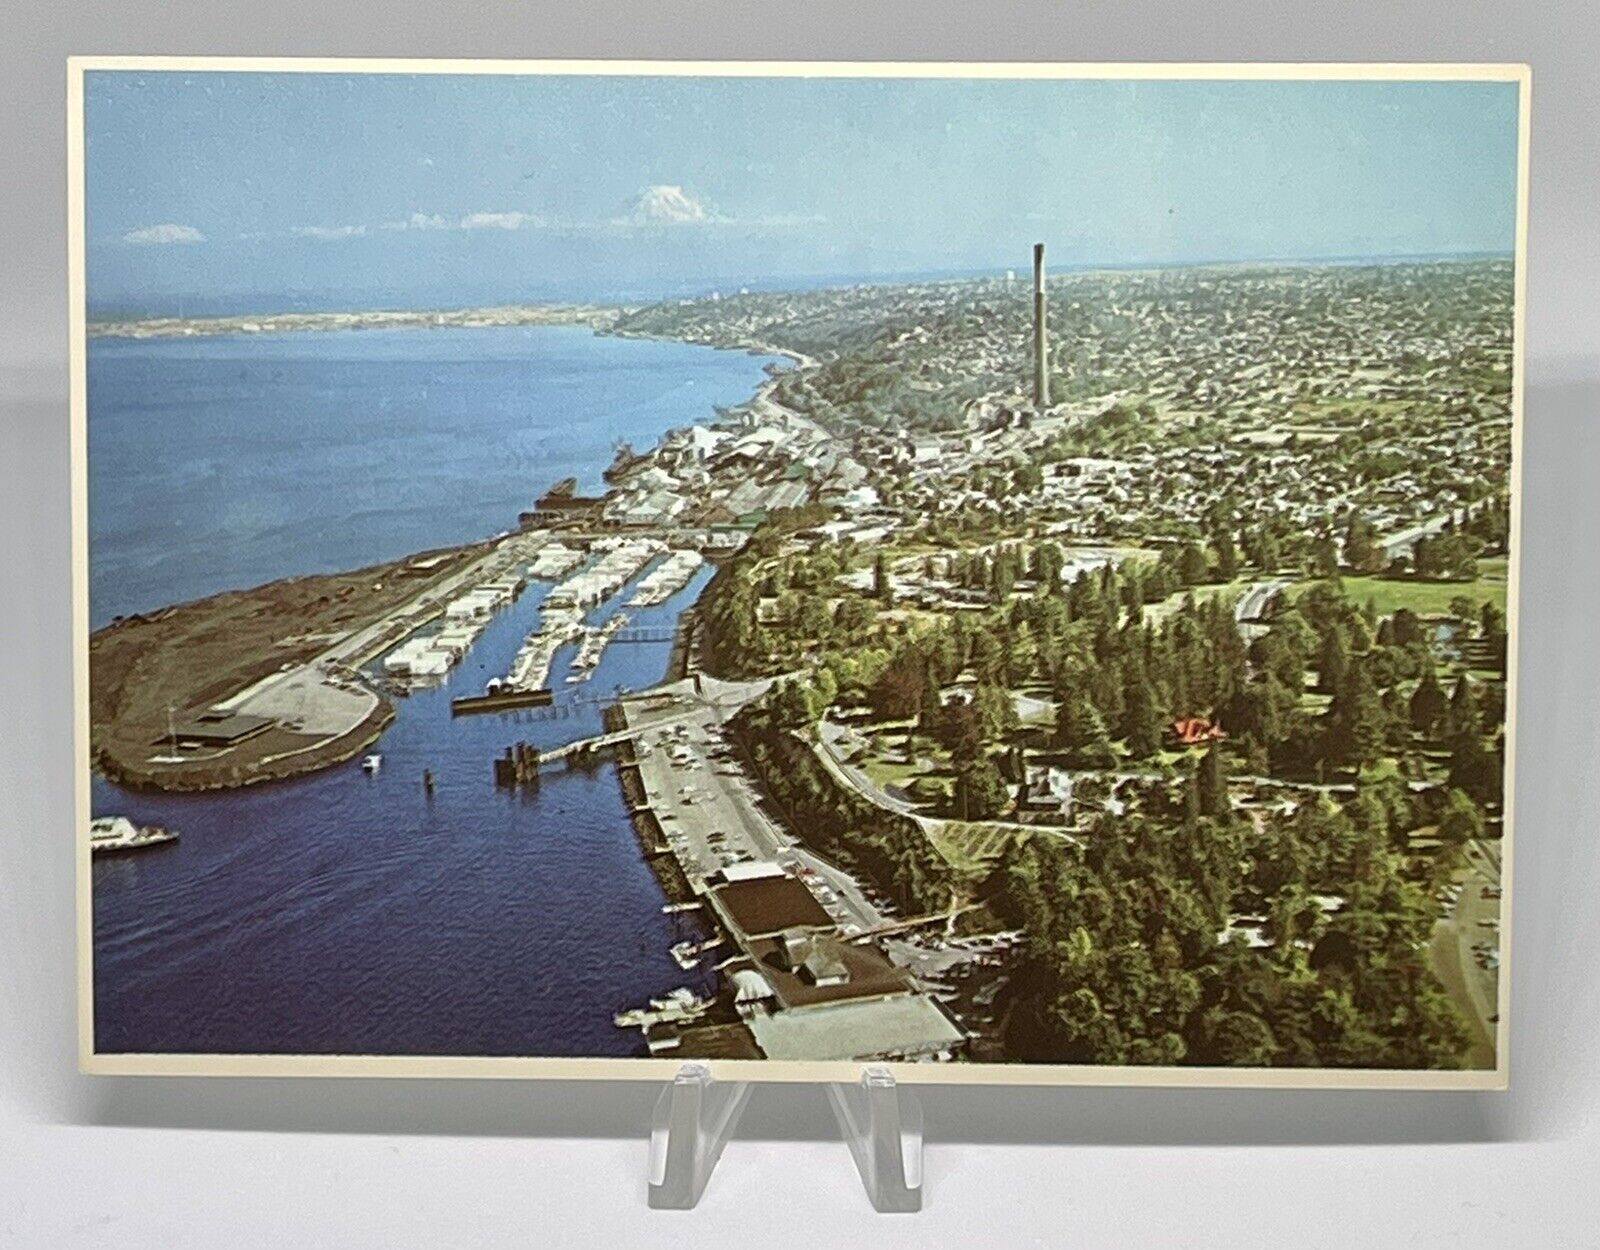 POINT DEFIANCE PARK VINTAGE POST CARD TACOMA WASHINGTON Queen of the Cascades